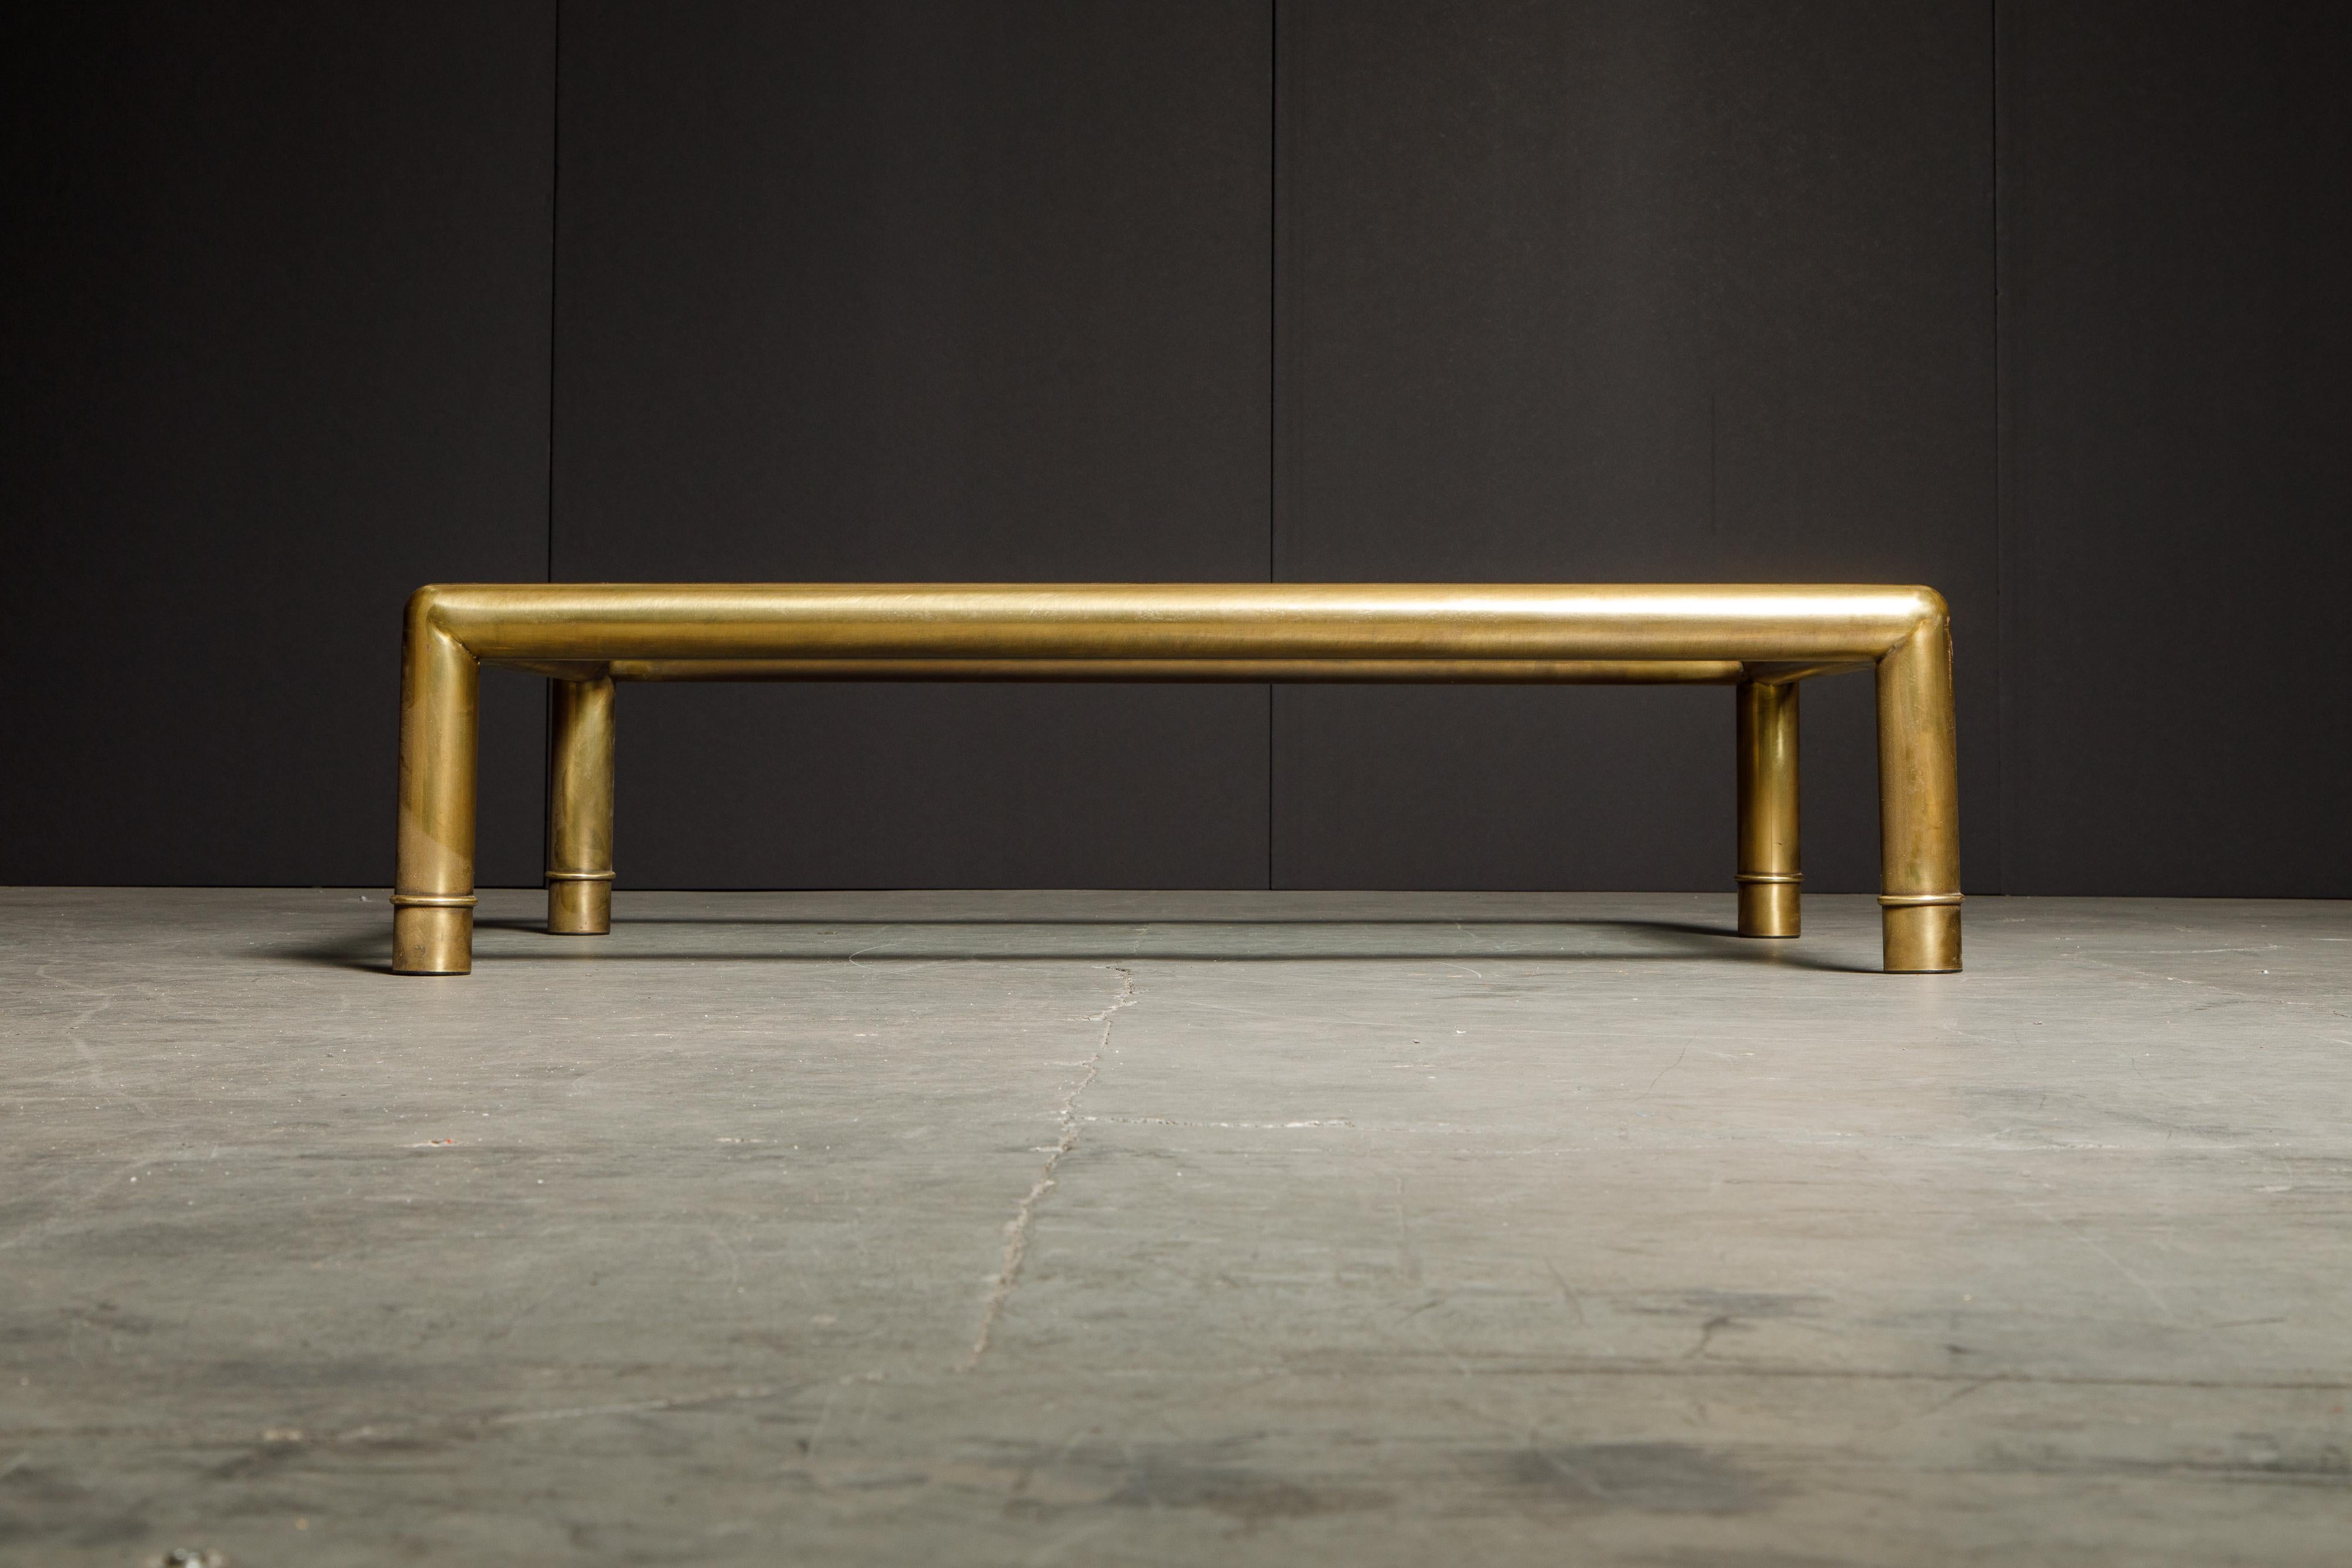 This stunning coffee table by Mastercraft features a generously large size and gorgeous tubular brass frame with a large bevelled edge clear glass top. The four legs have a band on each leg mimicking bamboo in a subtle way and making this cocktail